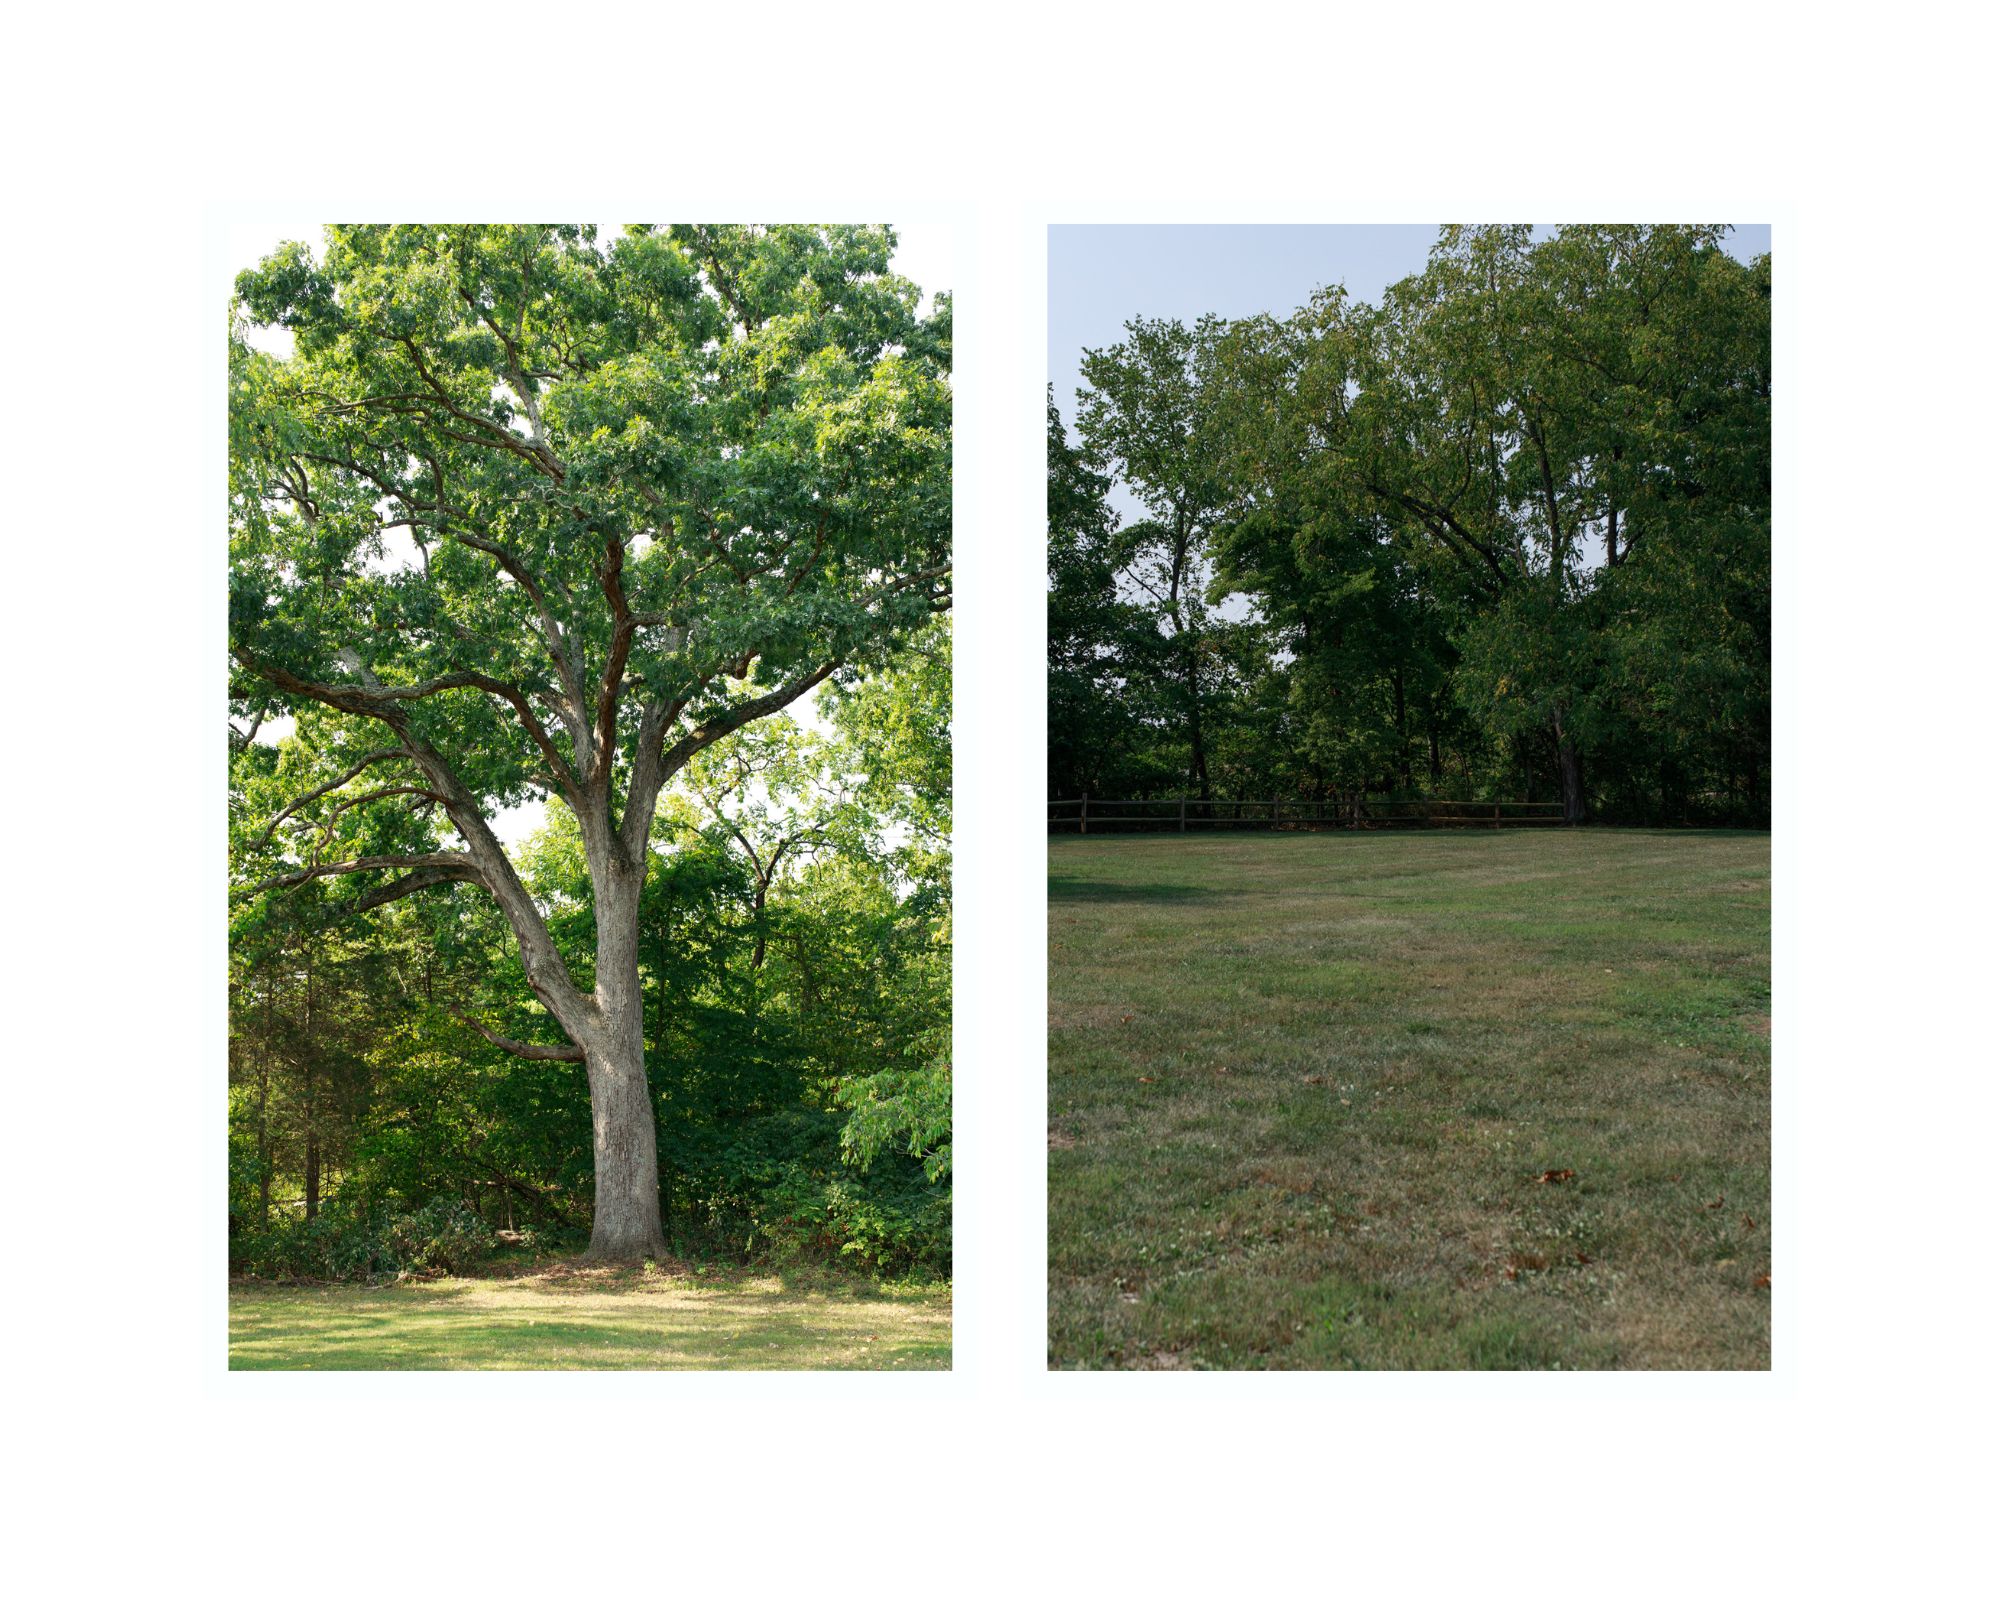 Large trees provide a gorgeous setting for bridal portraits. The photo on the right is of the flat green space where you could put your reception tent.